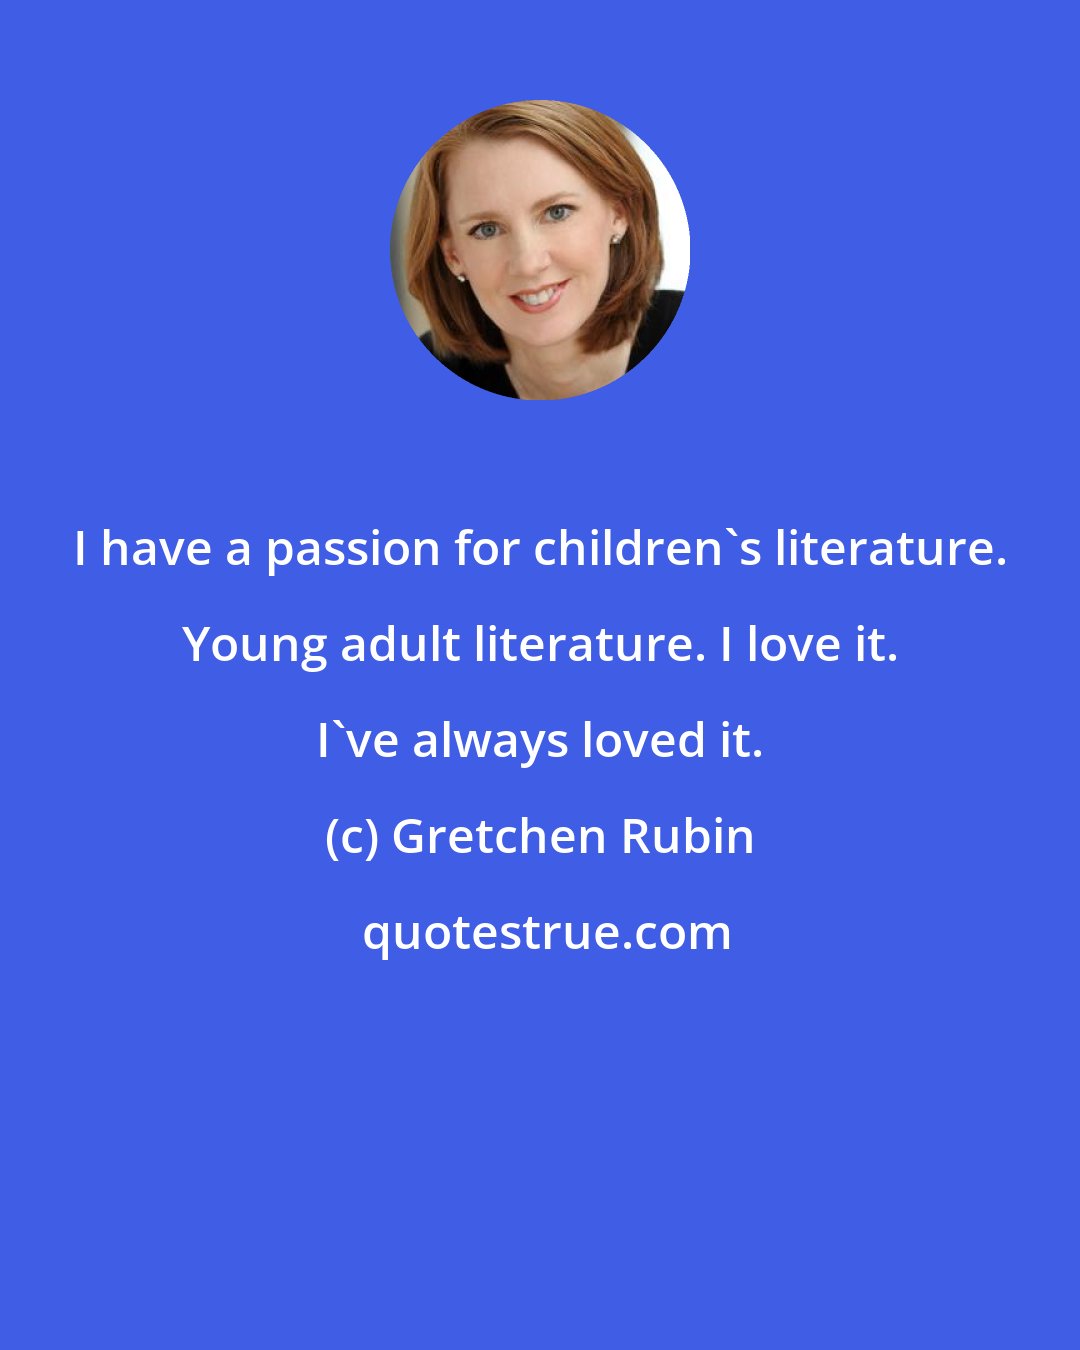 Gretchen Rubin: I have a passion for children's literature. Young adult literature. I love it. I've always loved it.